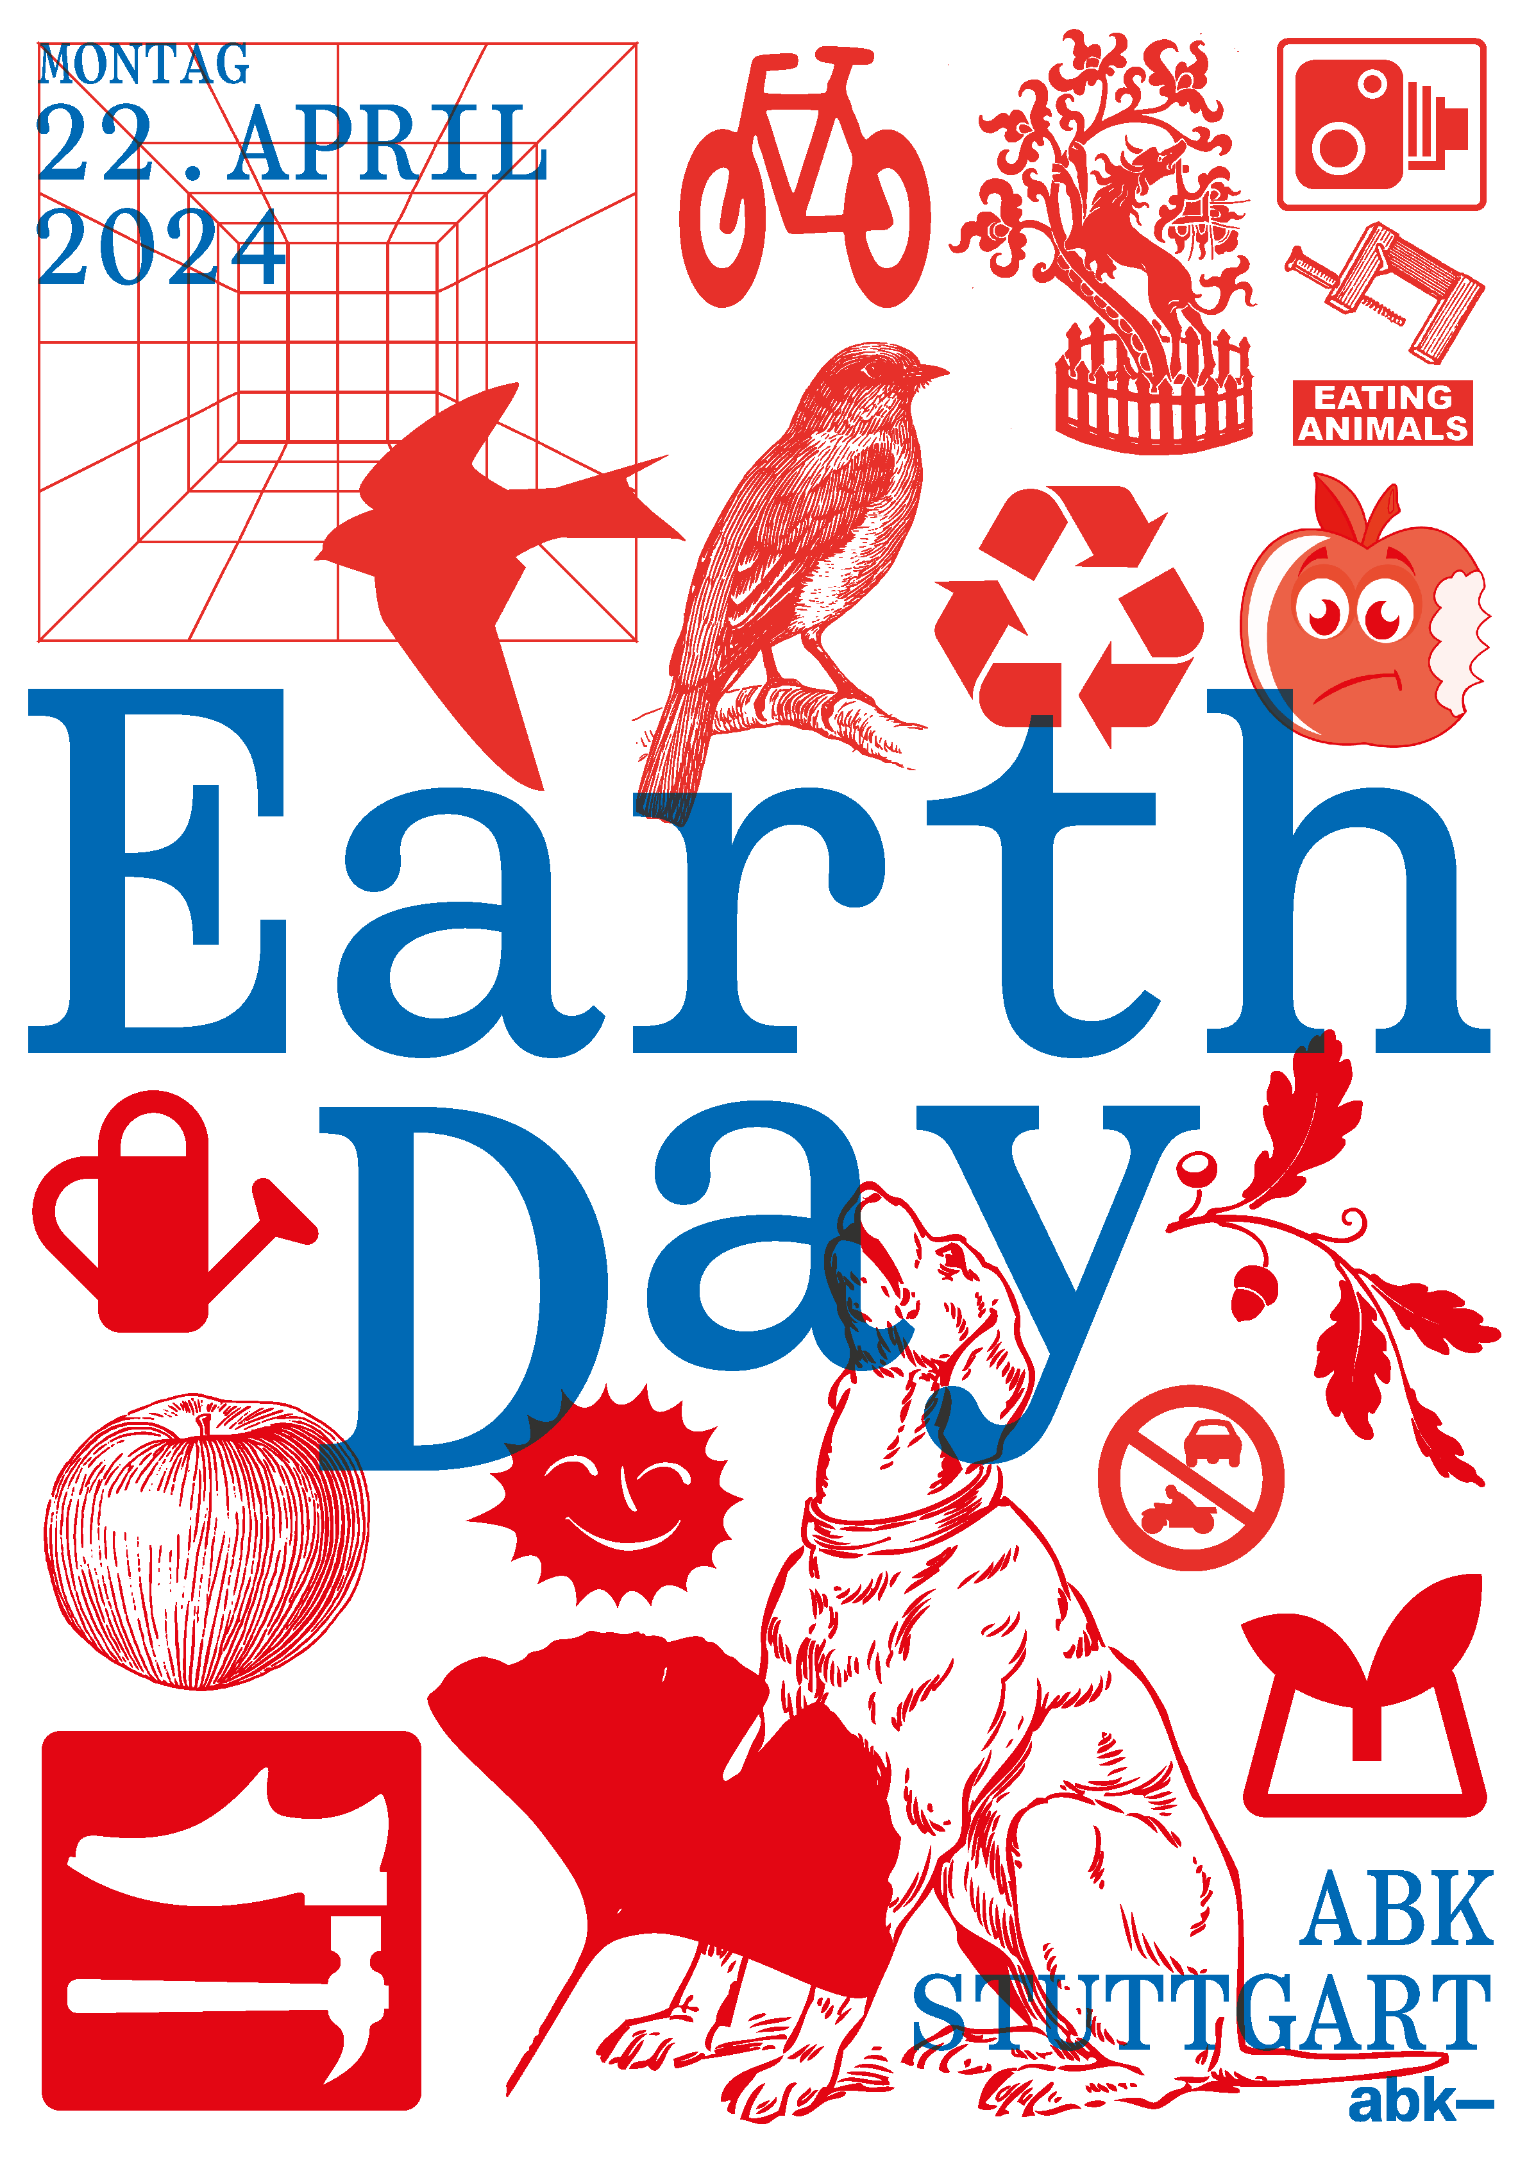 AKA EARTH DAY – 24H ECO-ACTIONS/PROJECTS 